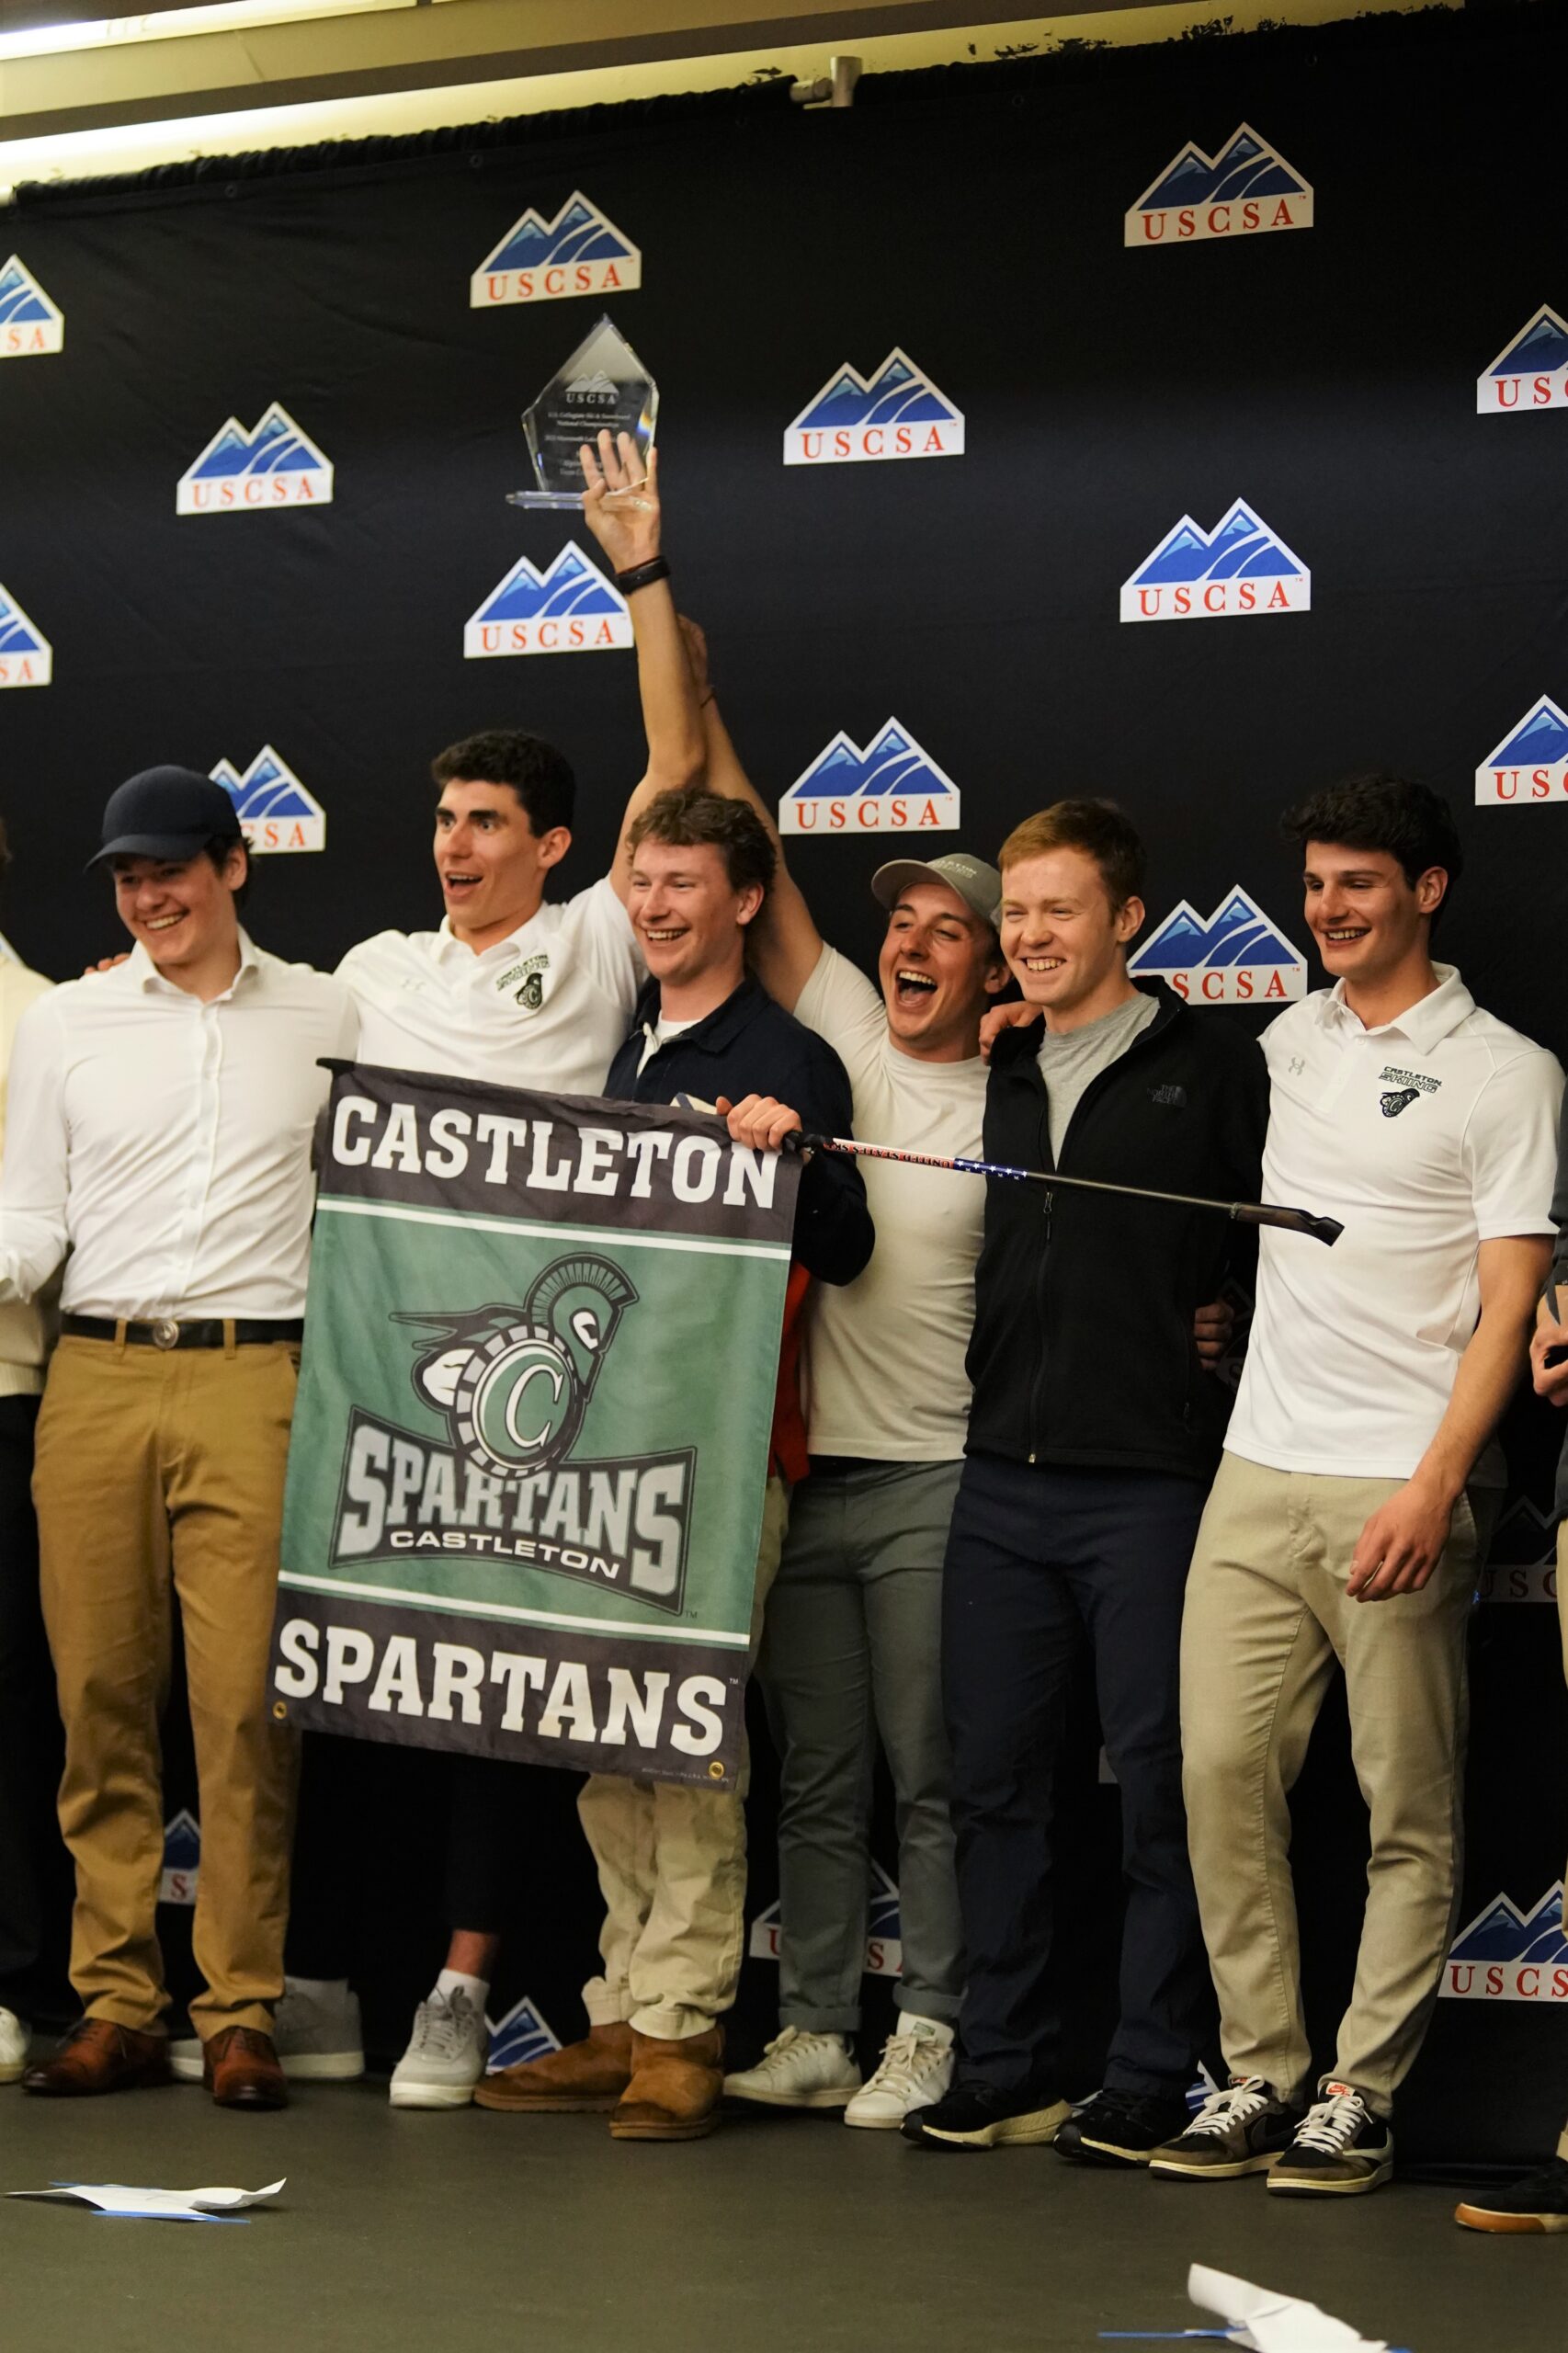 Alpine skiers are national champs